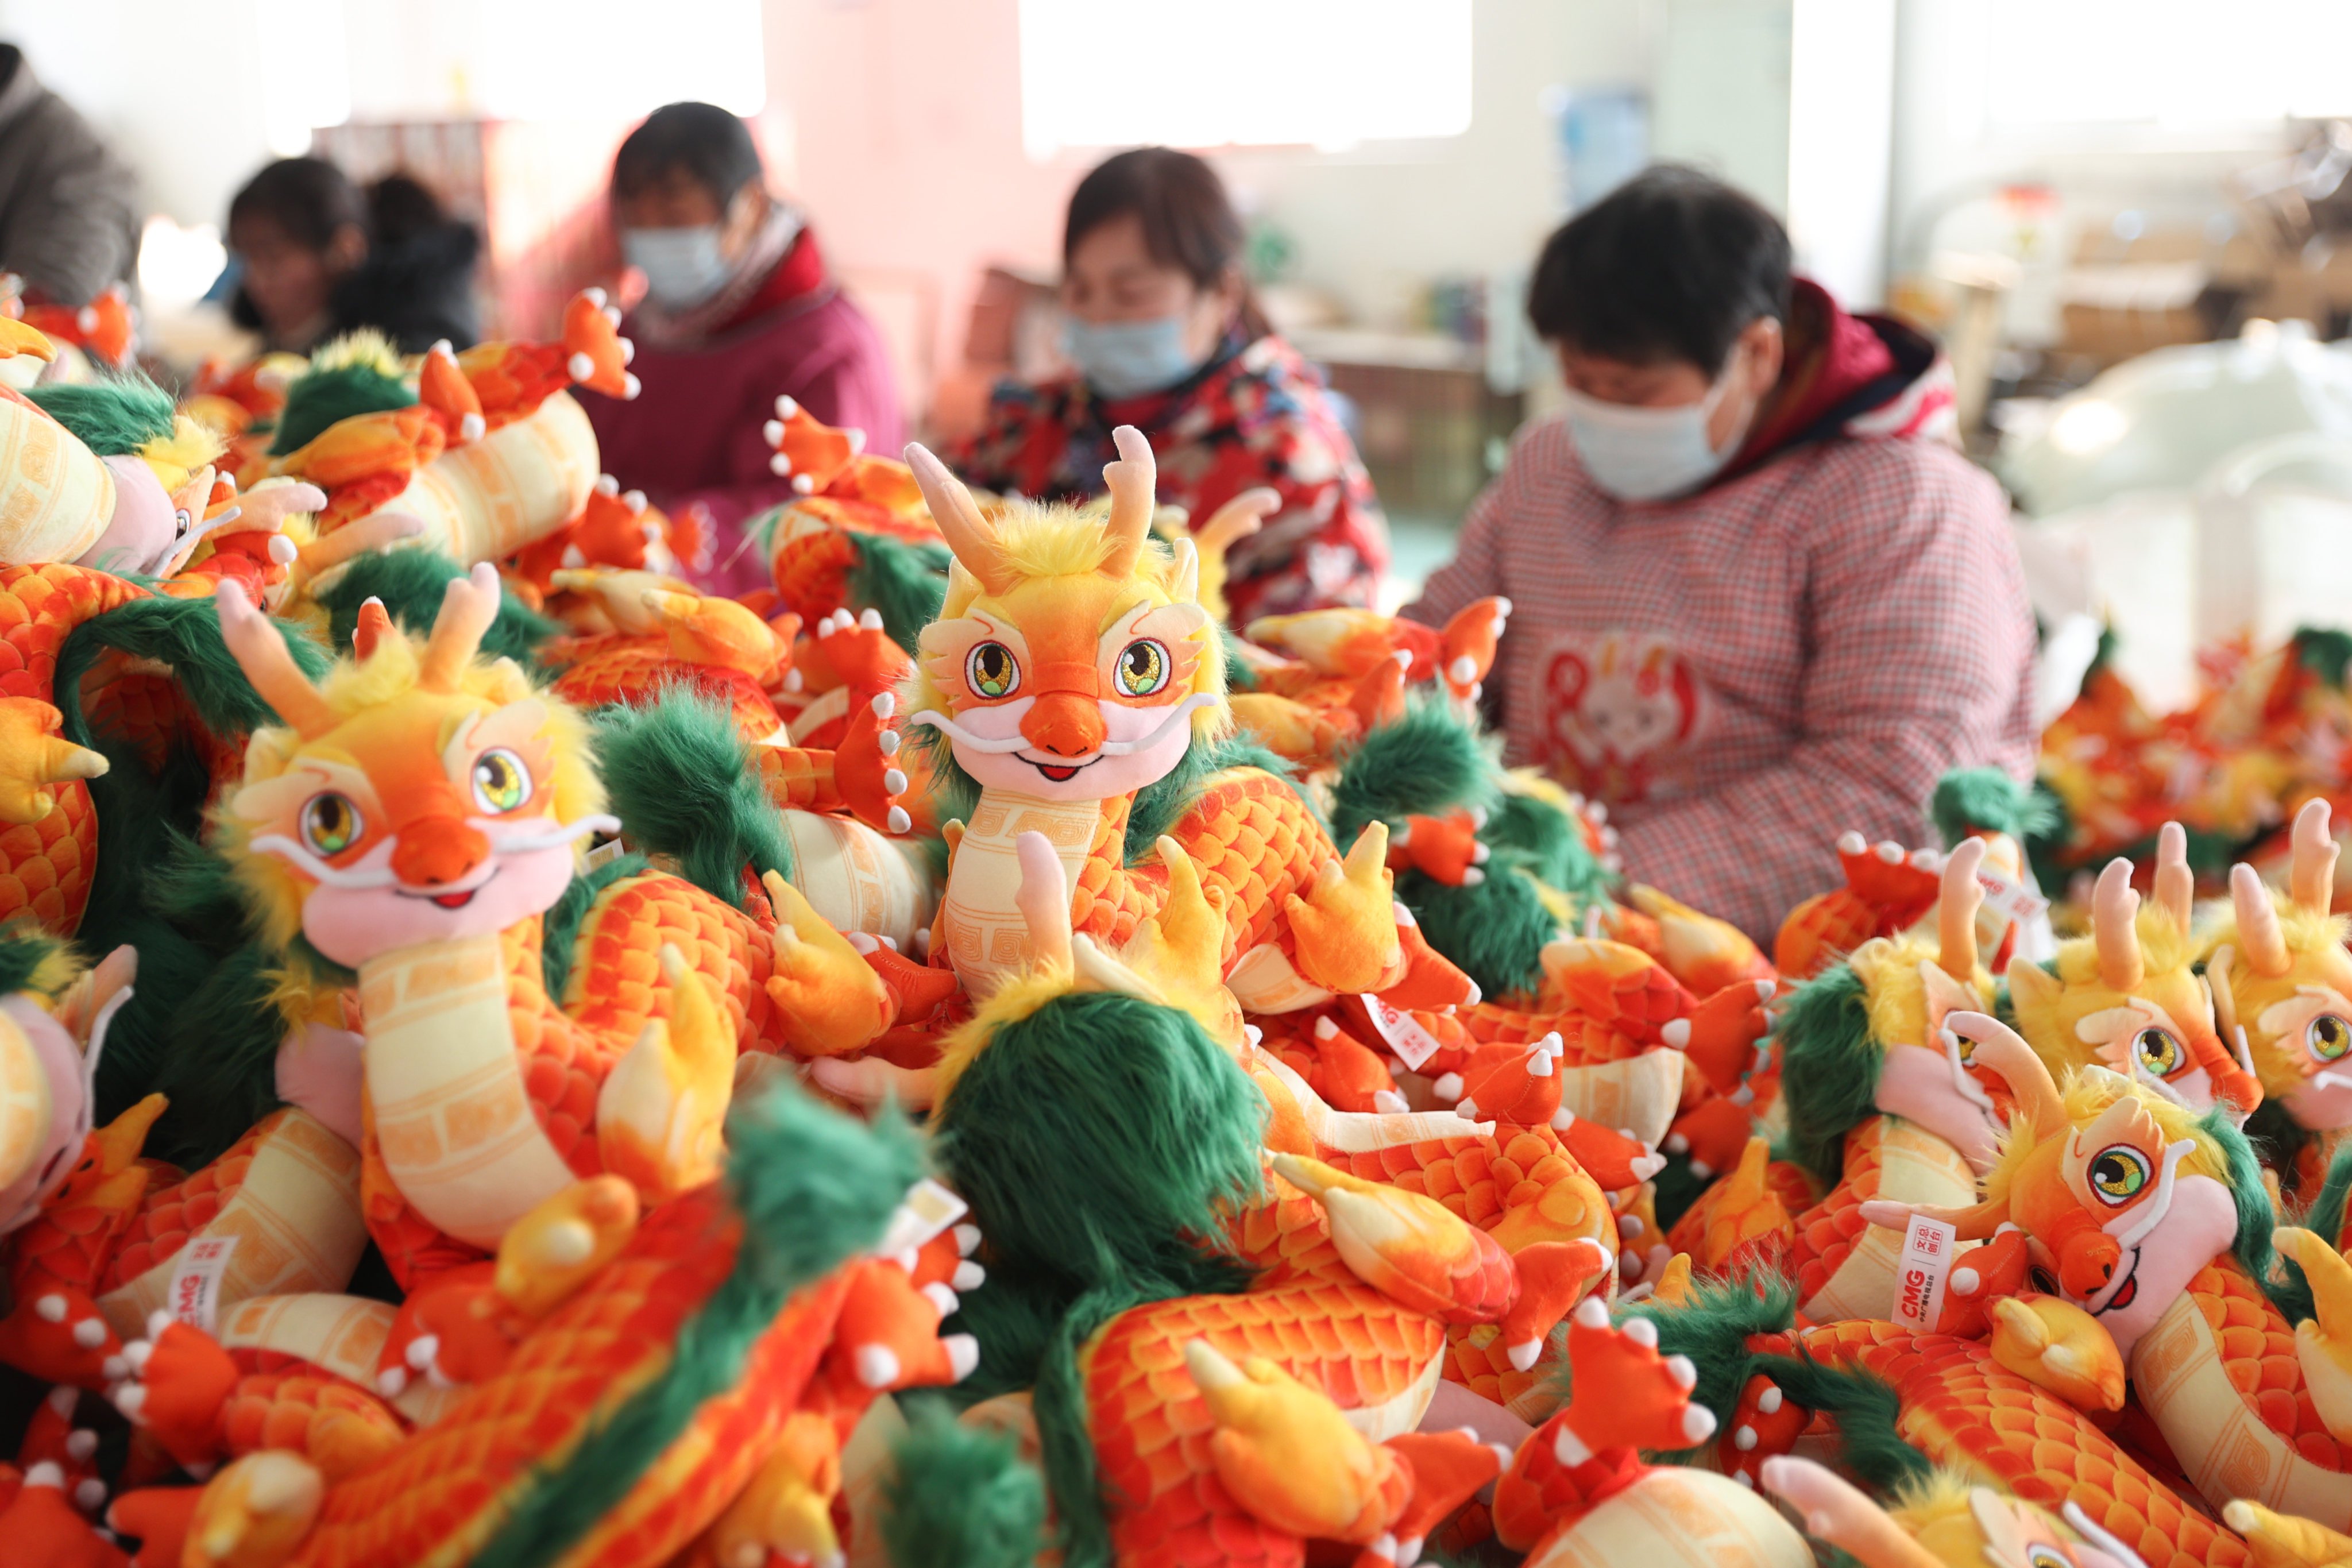 Workers produce dragon toys ahead of the start of the Year of the Dragon at a toy company in Chengtou town in eastern China’s Jiangsu province on January 27. Photo: Getty Images